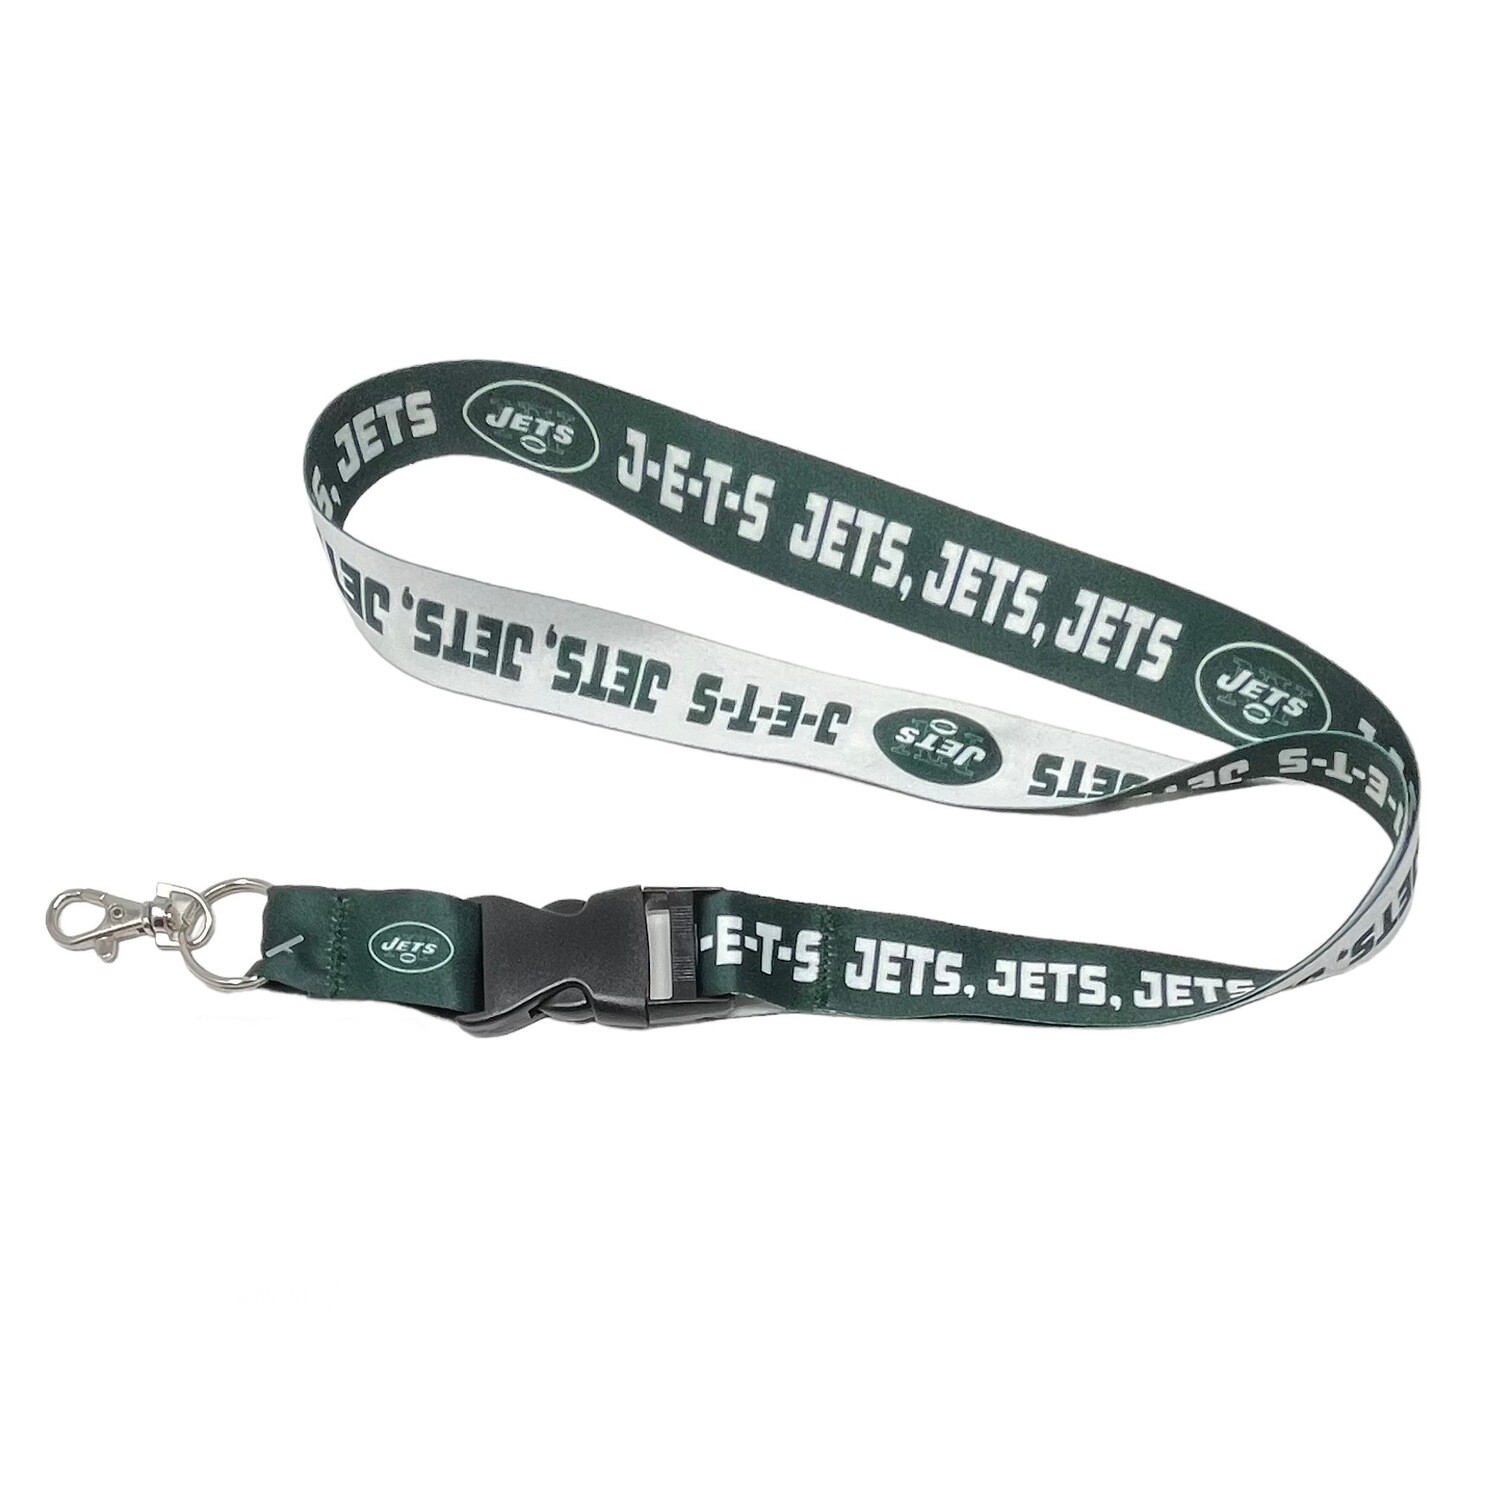 NEW New York Jets Football Licensed Clip Badge Holder w/ Retractable Cord